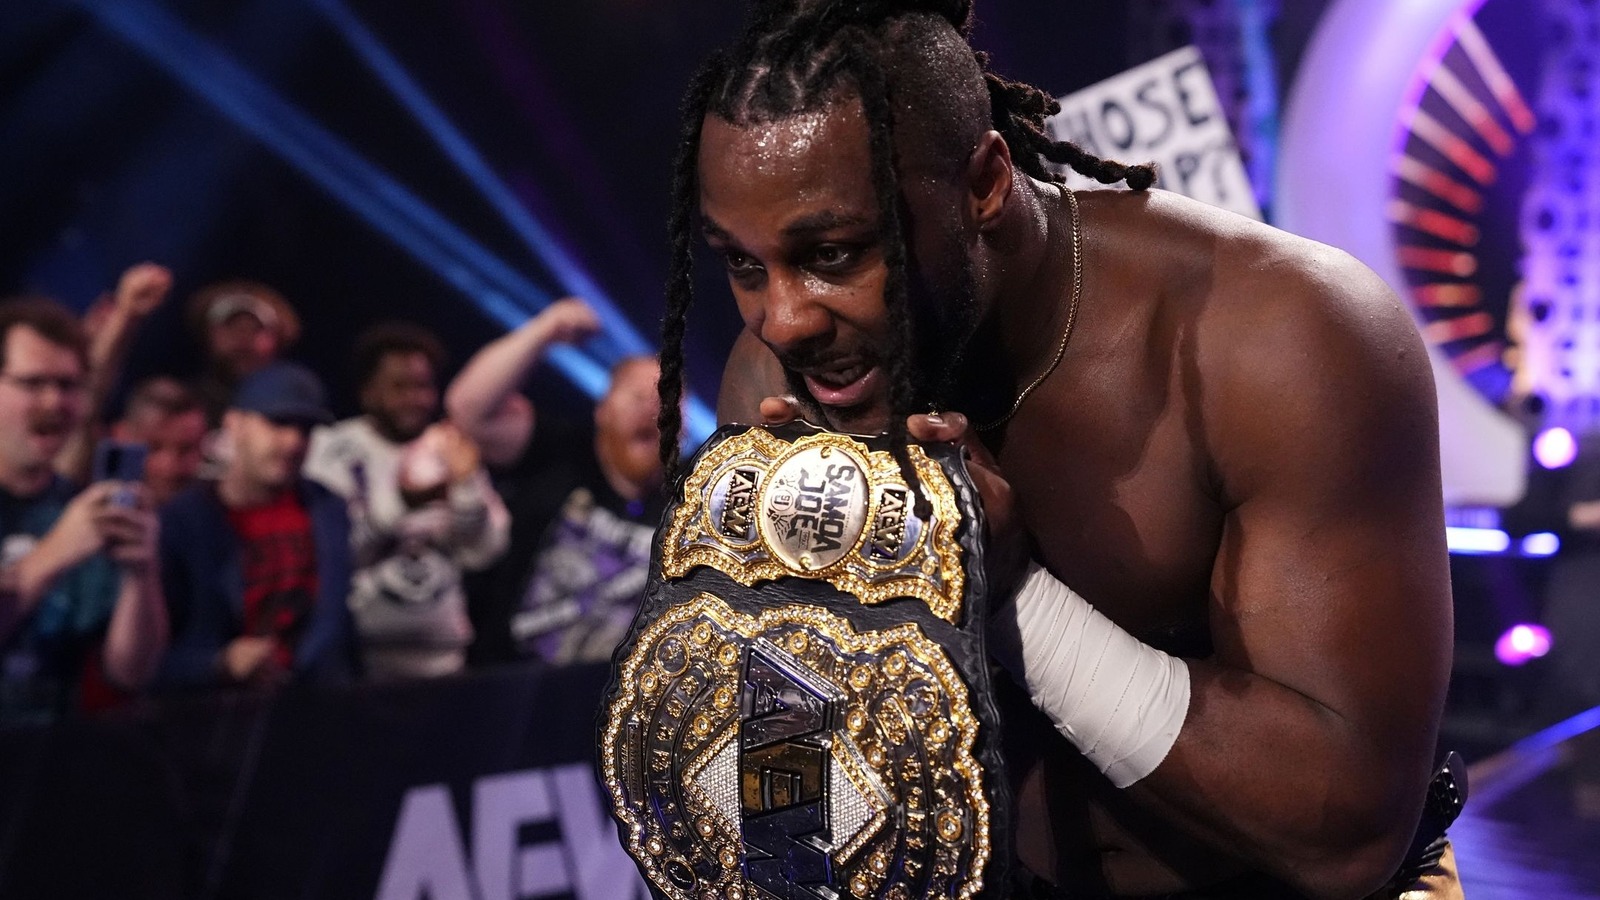 WWE Hall Of Famer Booker T Congratulates AEW Champ Swerve Strickland For Dynasty Win